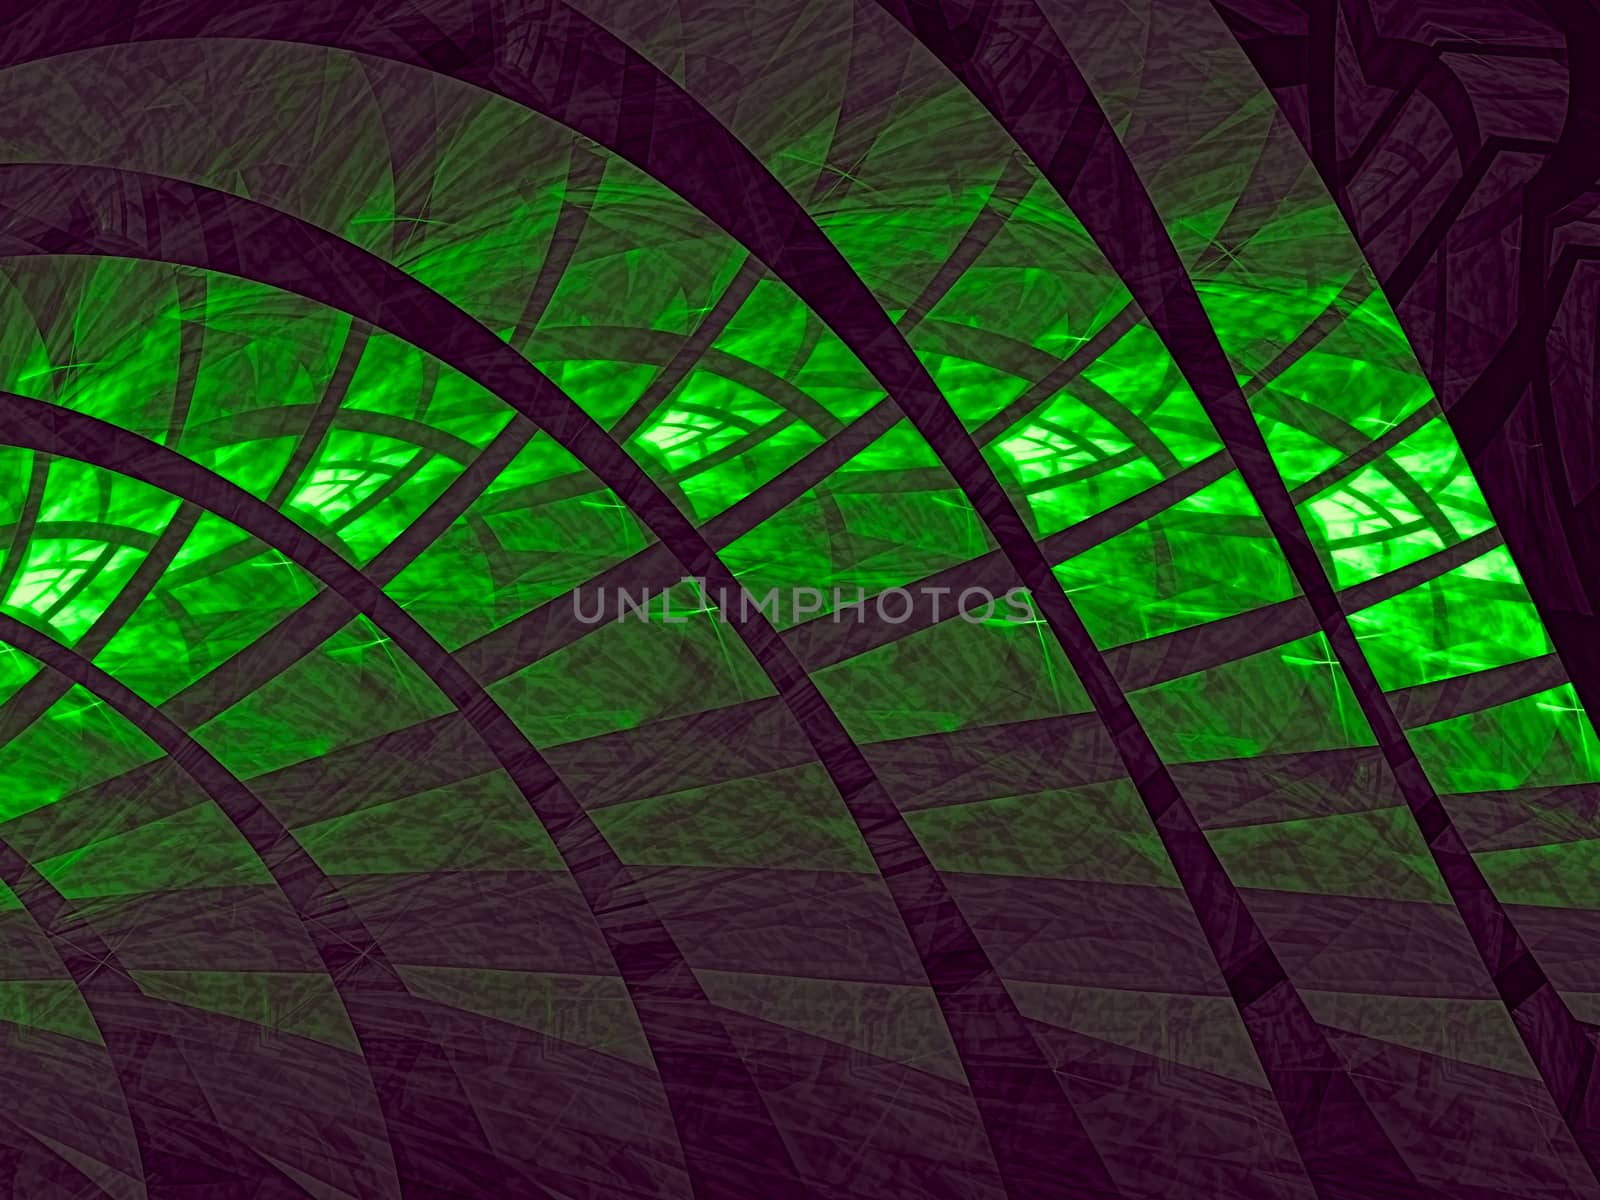 Abstract technology background - computer-generated image. Fractal geometry: chaos curls with grid and lights effect. Tech backdrop for banners, posters, web design.